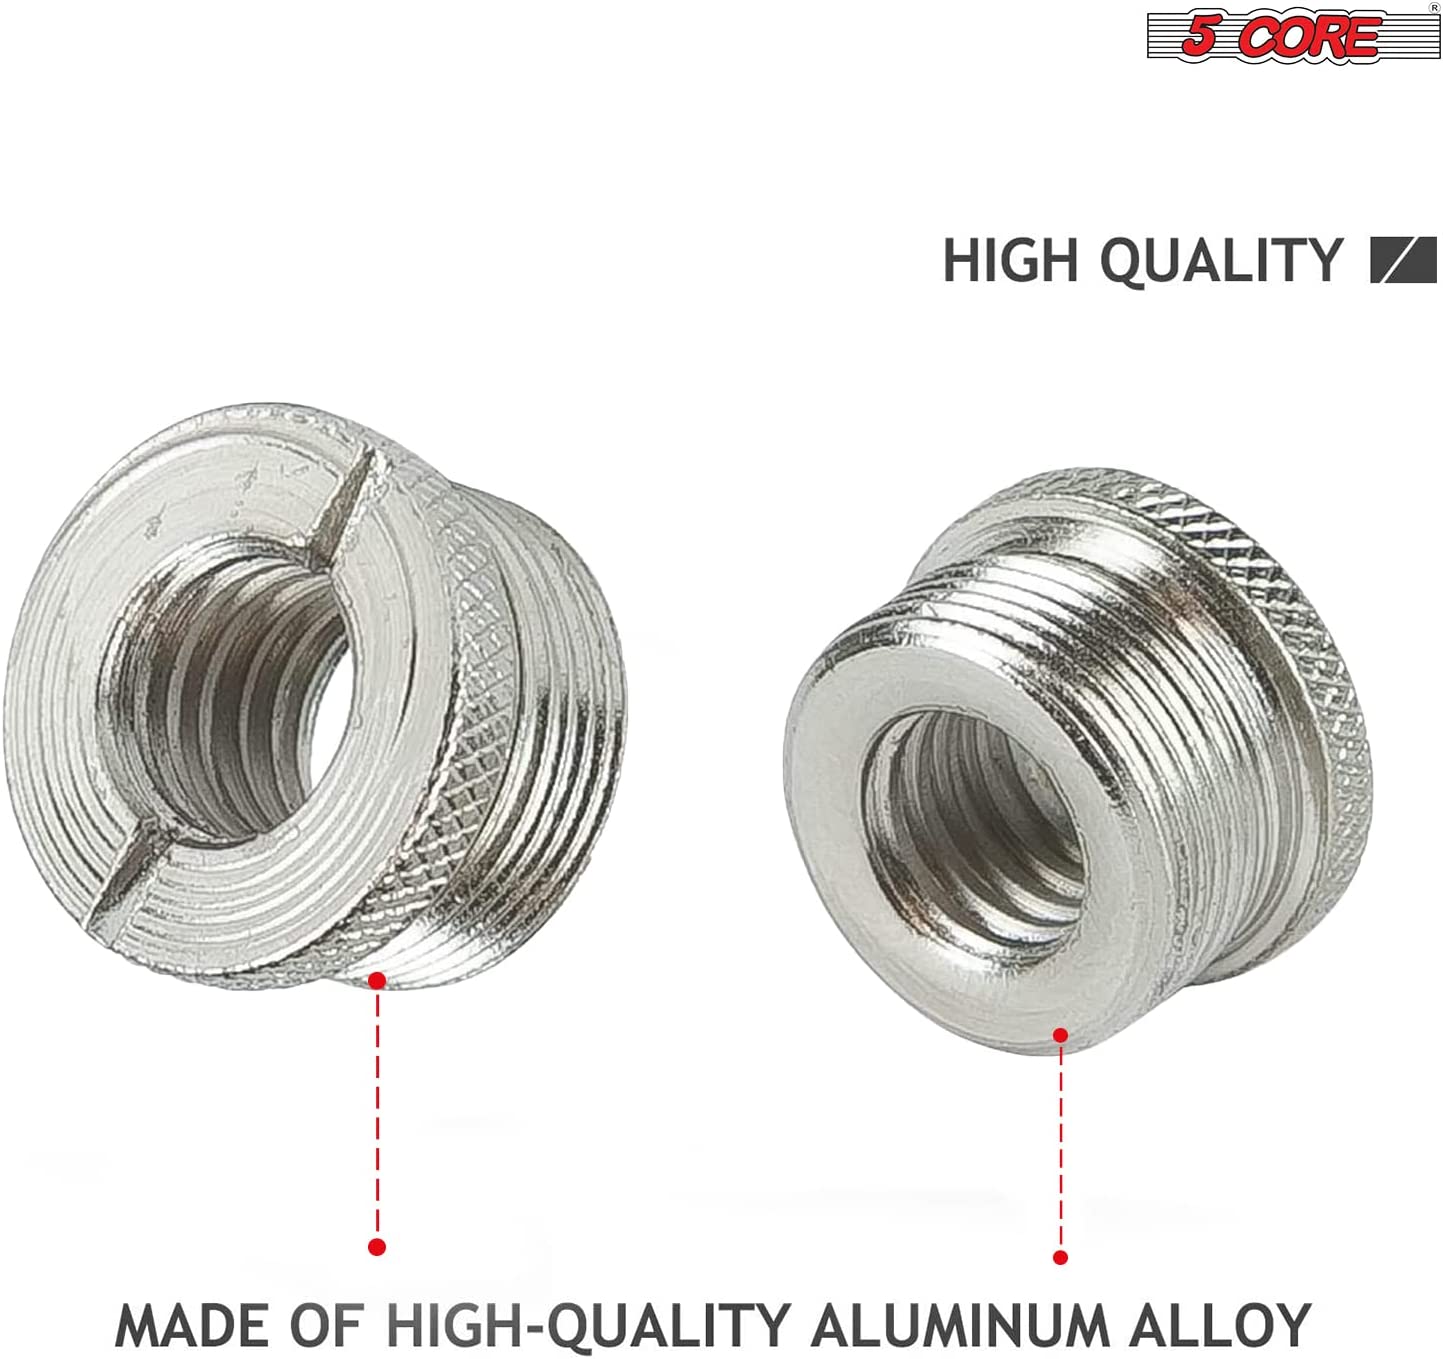 5Core 5/8" Male to 3/8" Female Screw Adapter Microphone Holder Aluminum, Silver MS ADP M SLV 2PCS